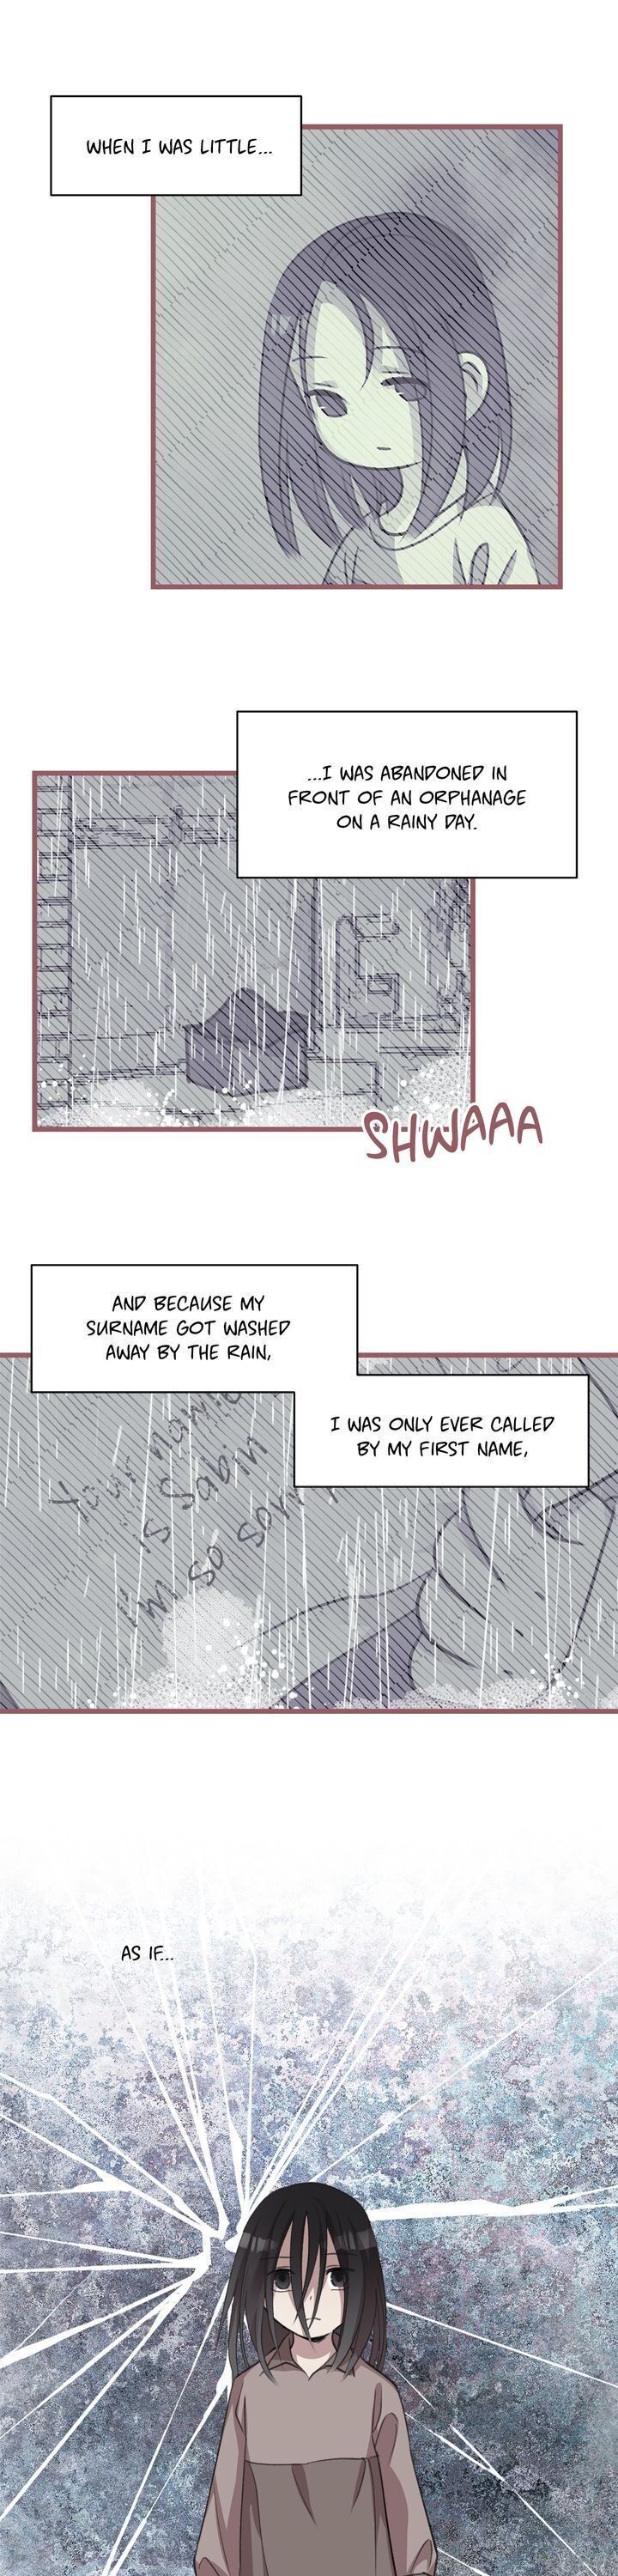 The Flower of Francia Chapter 029 page 10